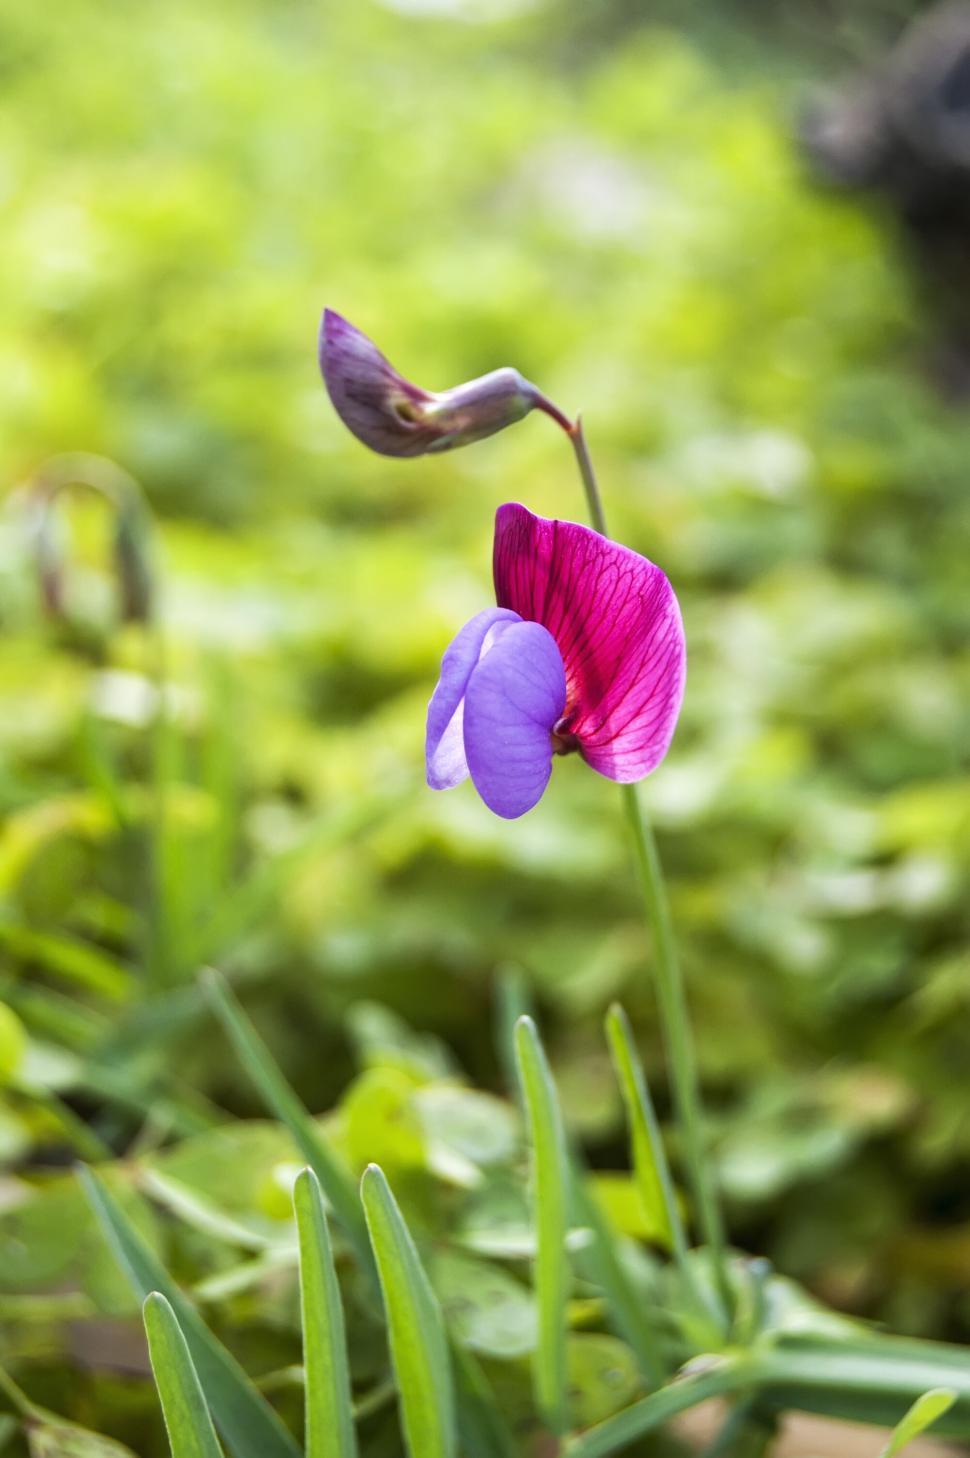 Free Image of Solo purple wildflower in vibrant greenery 